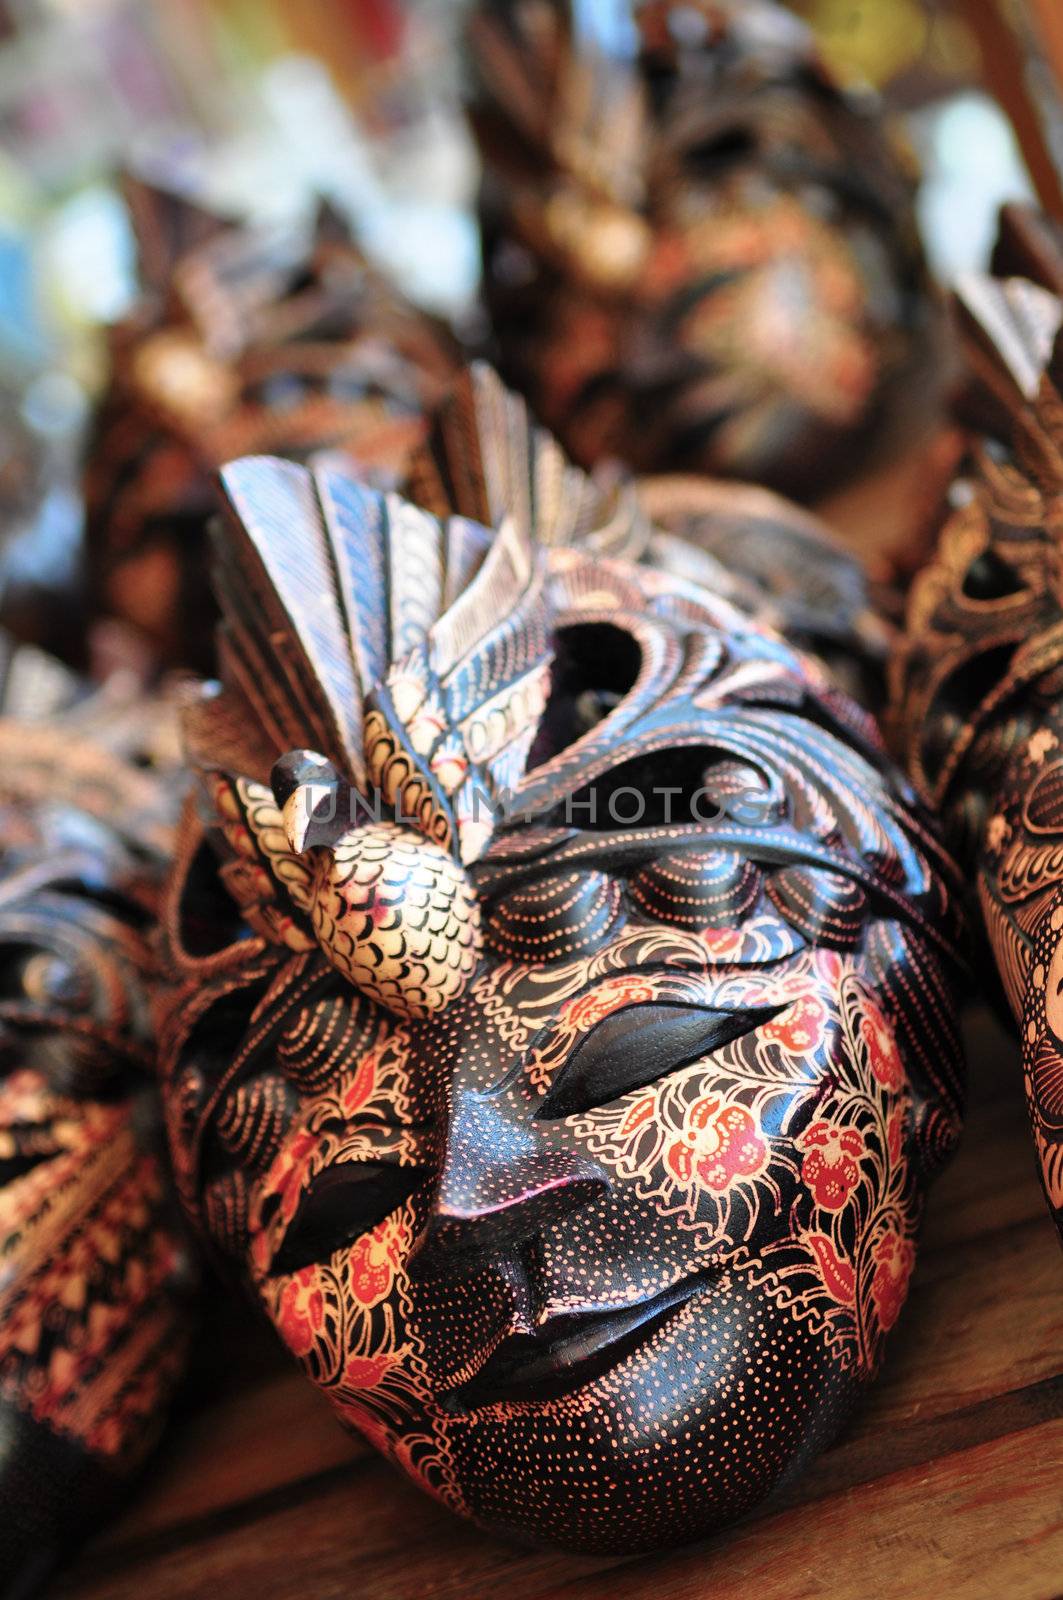 Balinese wooden masks detail close up of the hand crafted masks